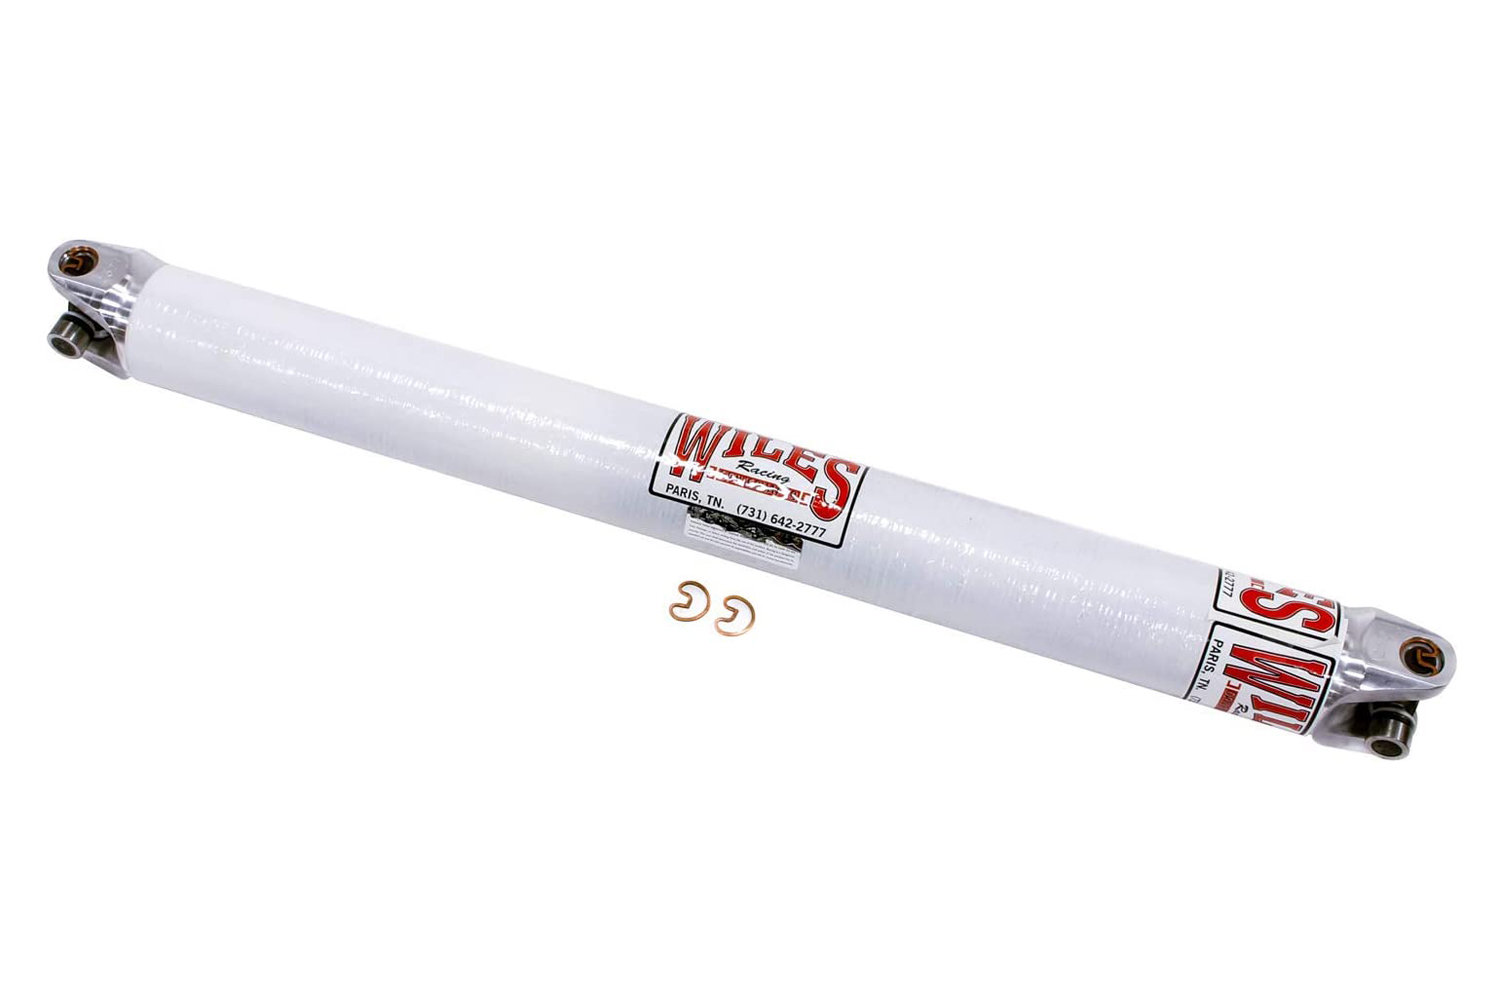 Wiles Driveshaft CF325355 Drive Shaft, 35.500 in Long, 3.25 in OD, 1310 U-Joints, Carbon Fiber, White Paint, Universal, Each